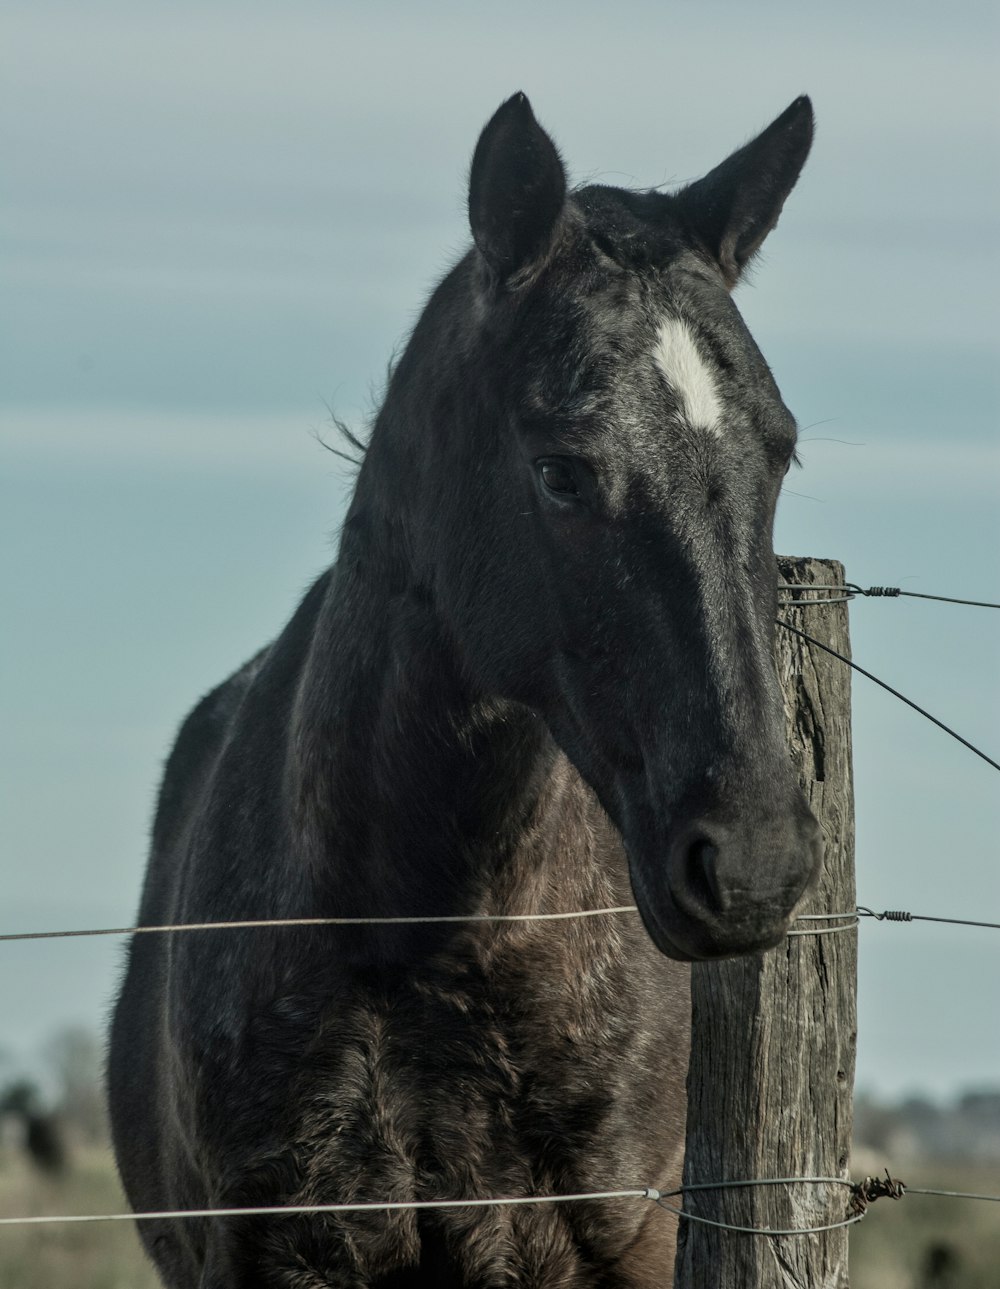 black horse in a field during daytime